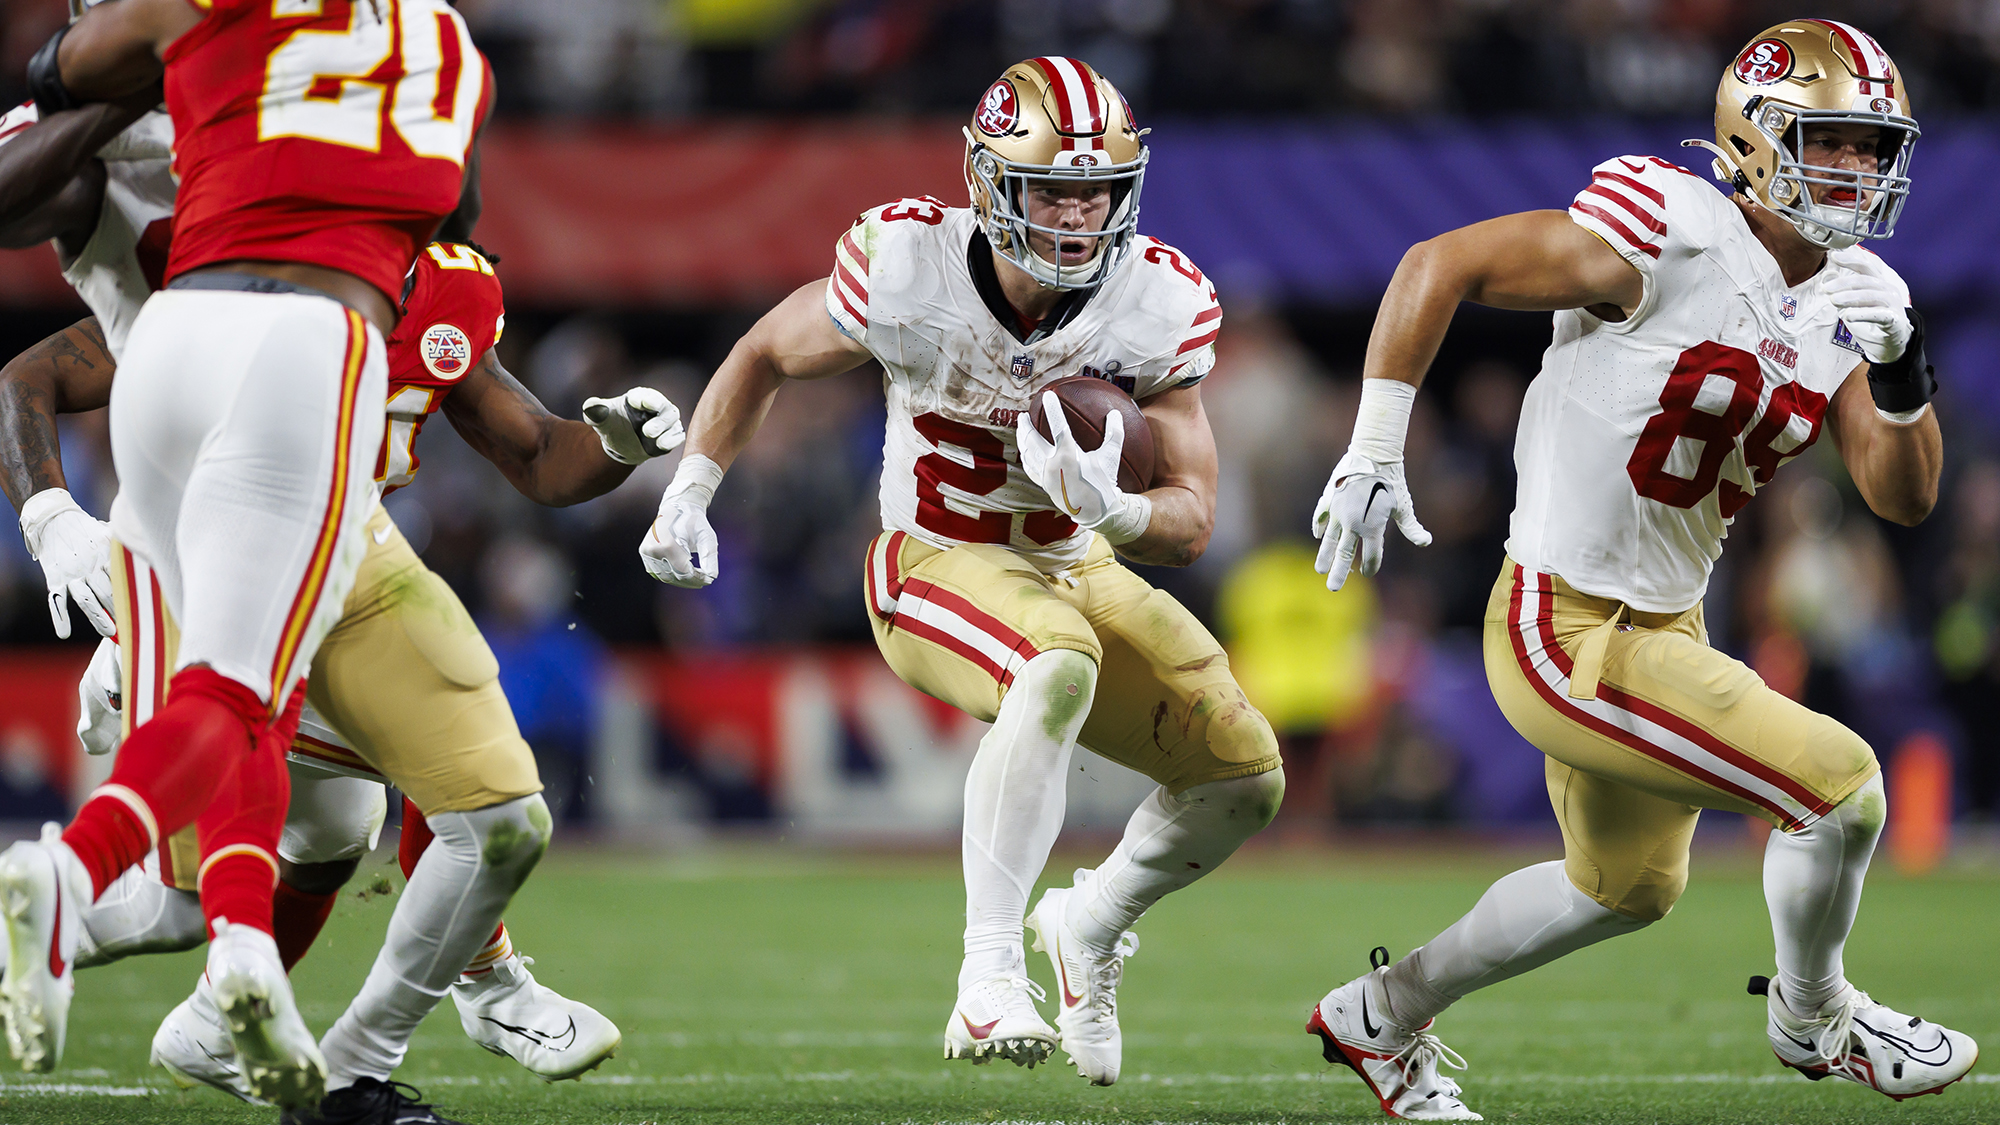 Christian McCaffrey of the San Francisco 49ers carries the football during the 2024 Super Bowl. Next Gen Stats show that McCaffrey consistently gained more yards than expected during the regular season but gained fewer in the Super Bowl, a game ultimately won by the Kansas City Chiefs.